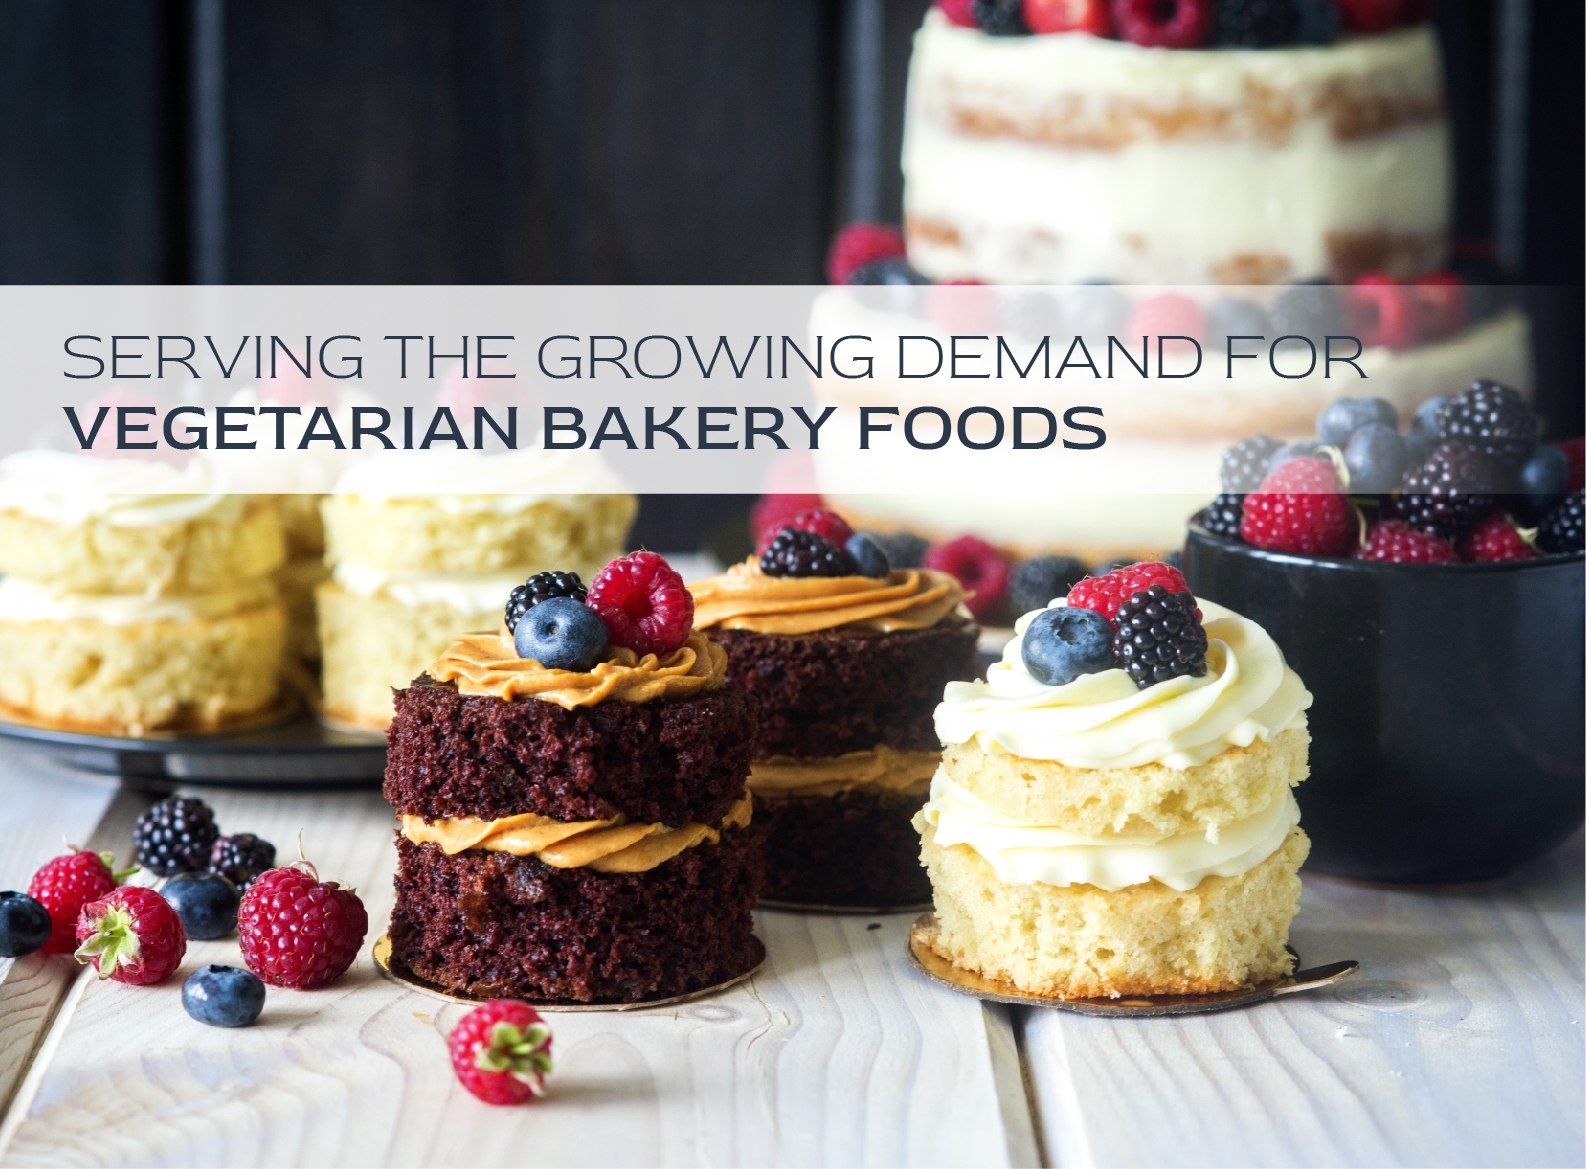 Serving the growing demand for vegetarian bakery foods